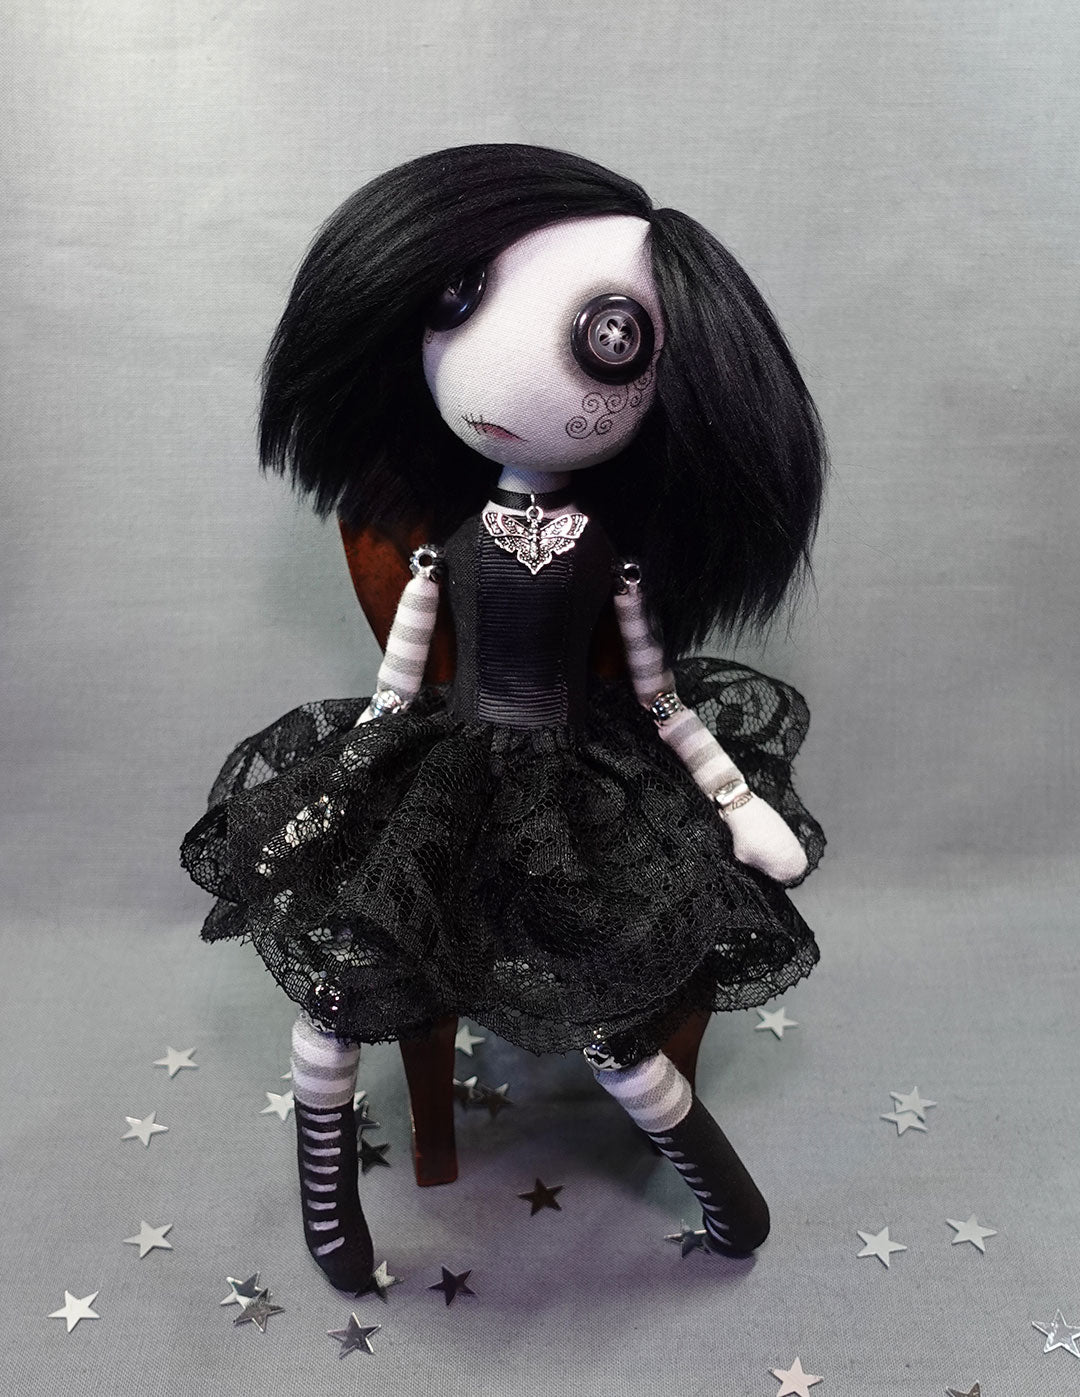 a button eyed cloth goth girl art doll in black dress with moth necklace